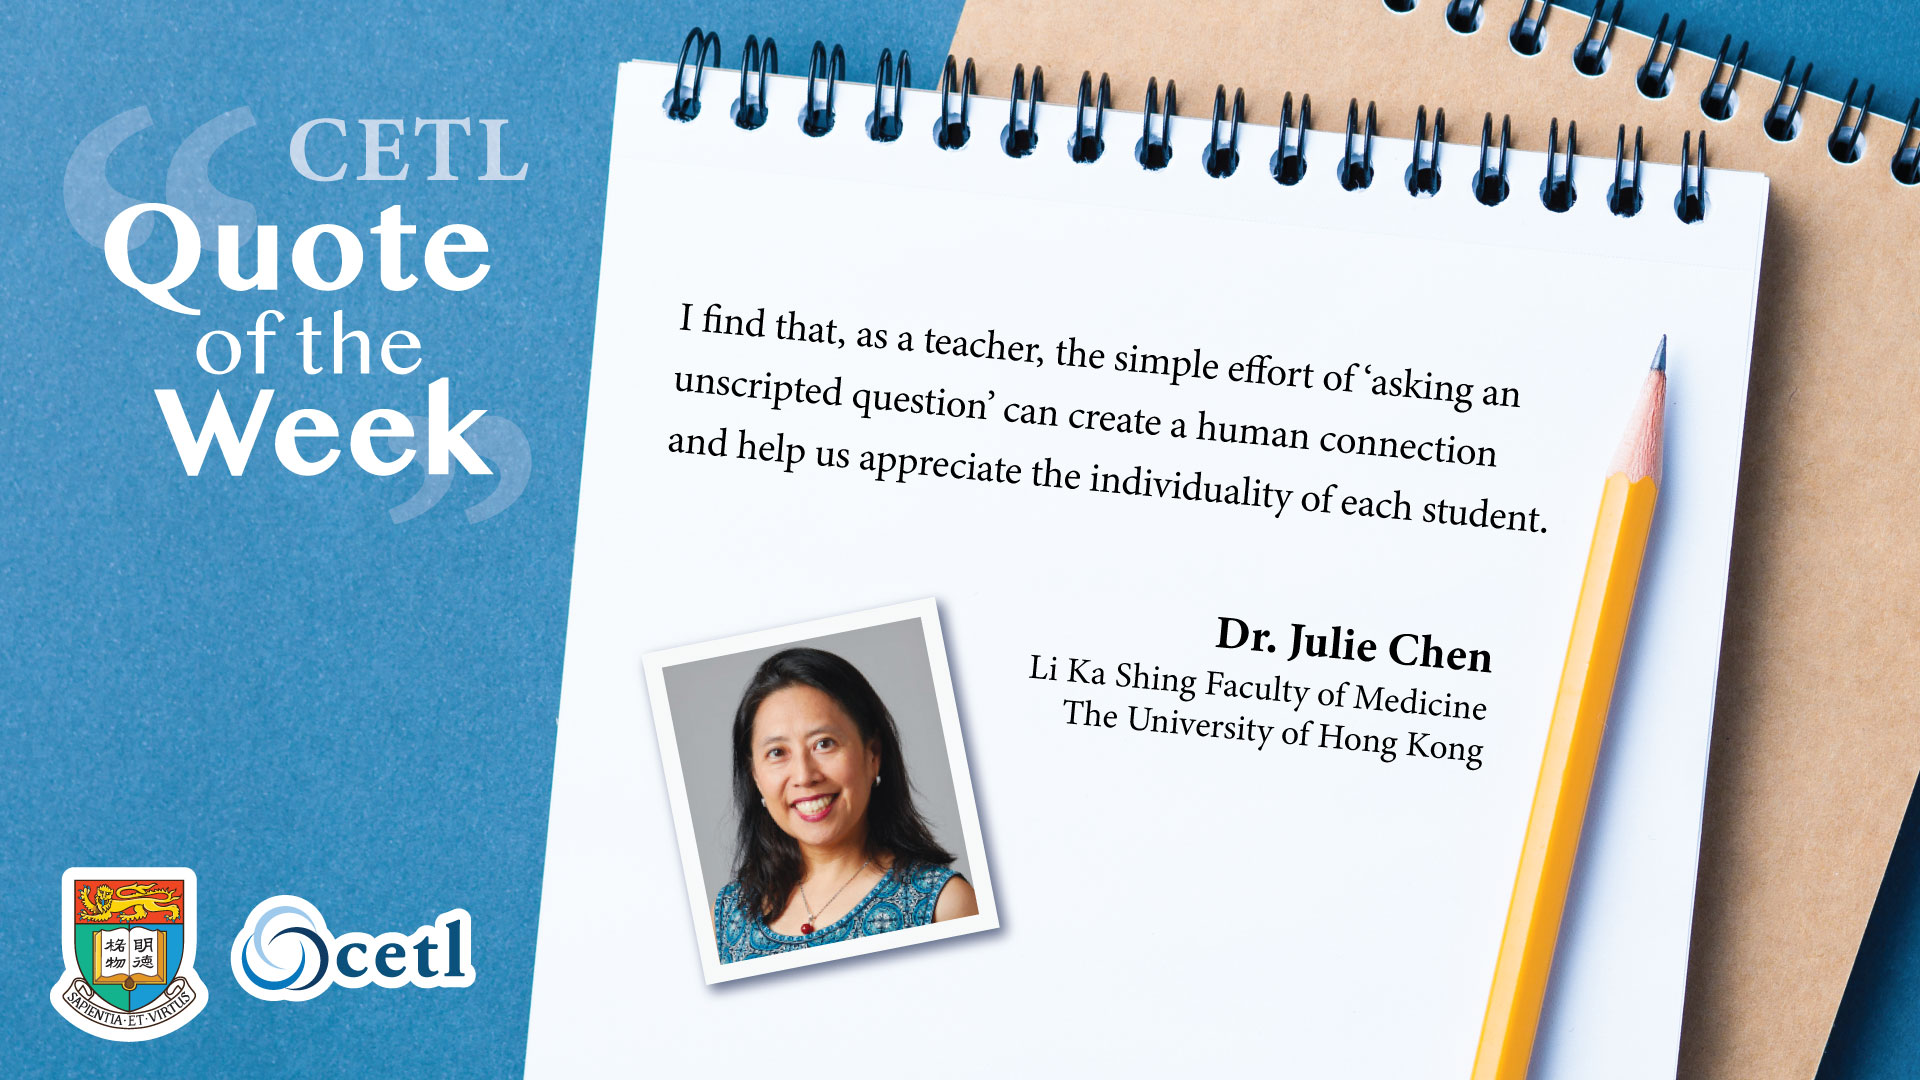 Dr. Julie Chen - I find that, as a teacher, the simple effort of ‘asking an unscripted question’ can create a human connection and help us appreciate the individuality of each student.